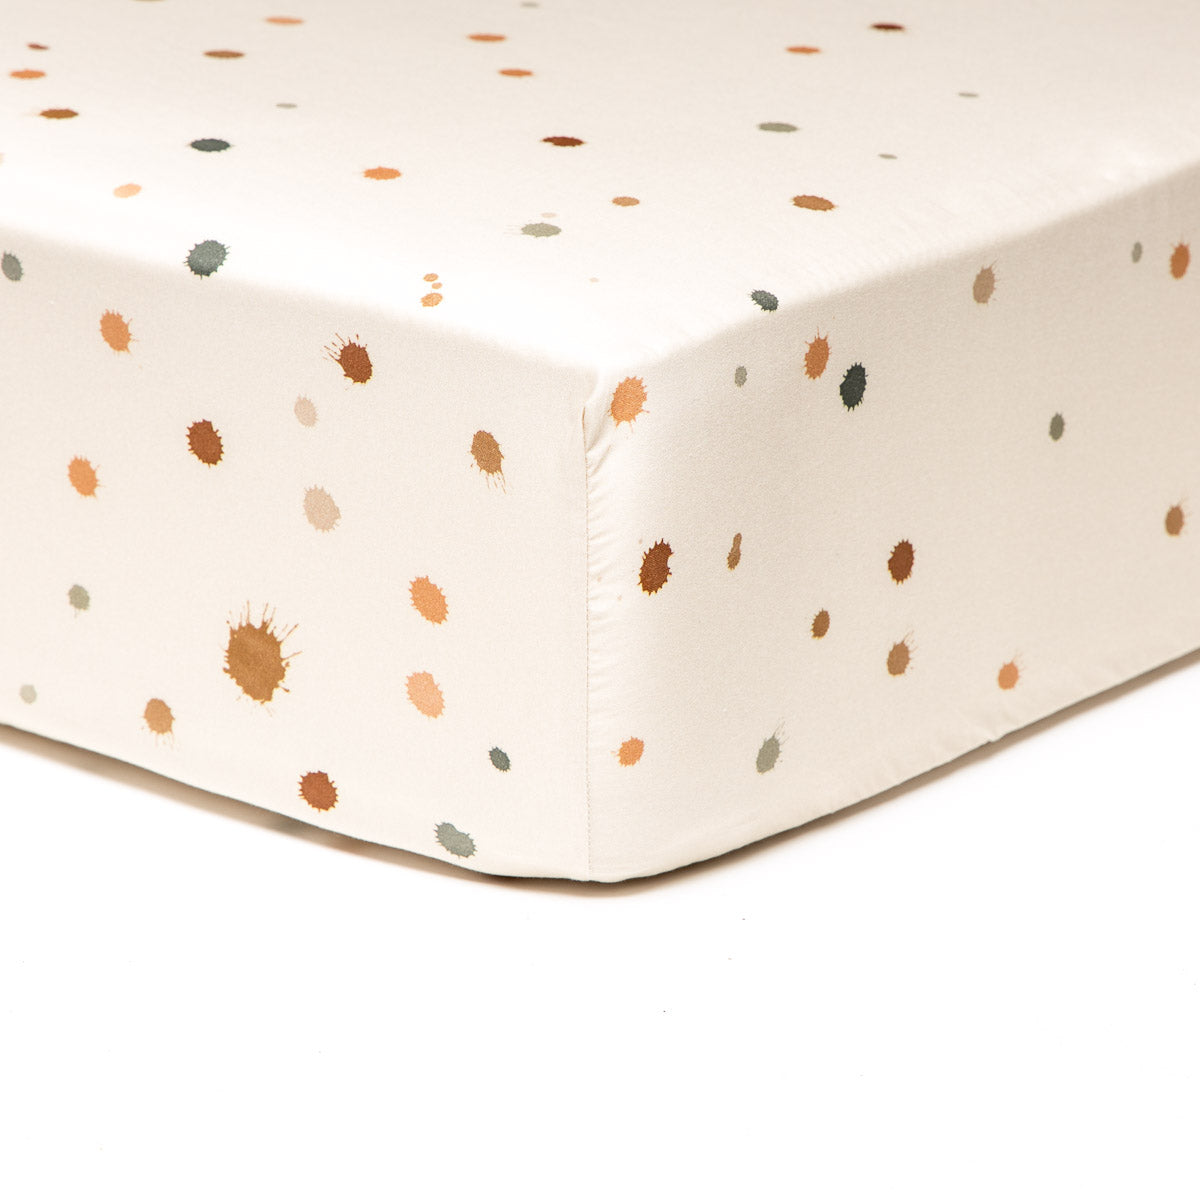 Fitted sheet - Confetti, 70 x 140cm